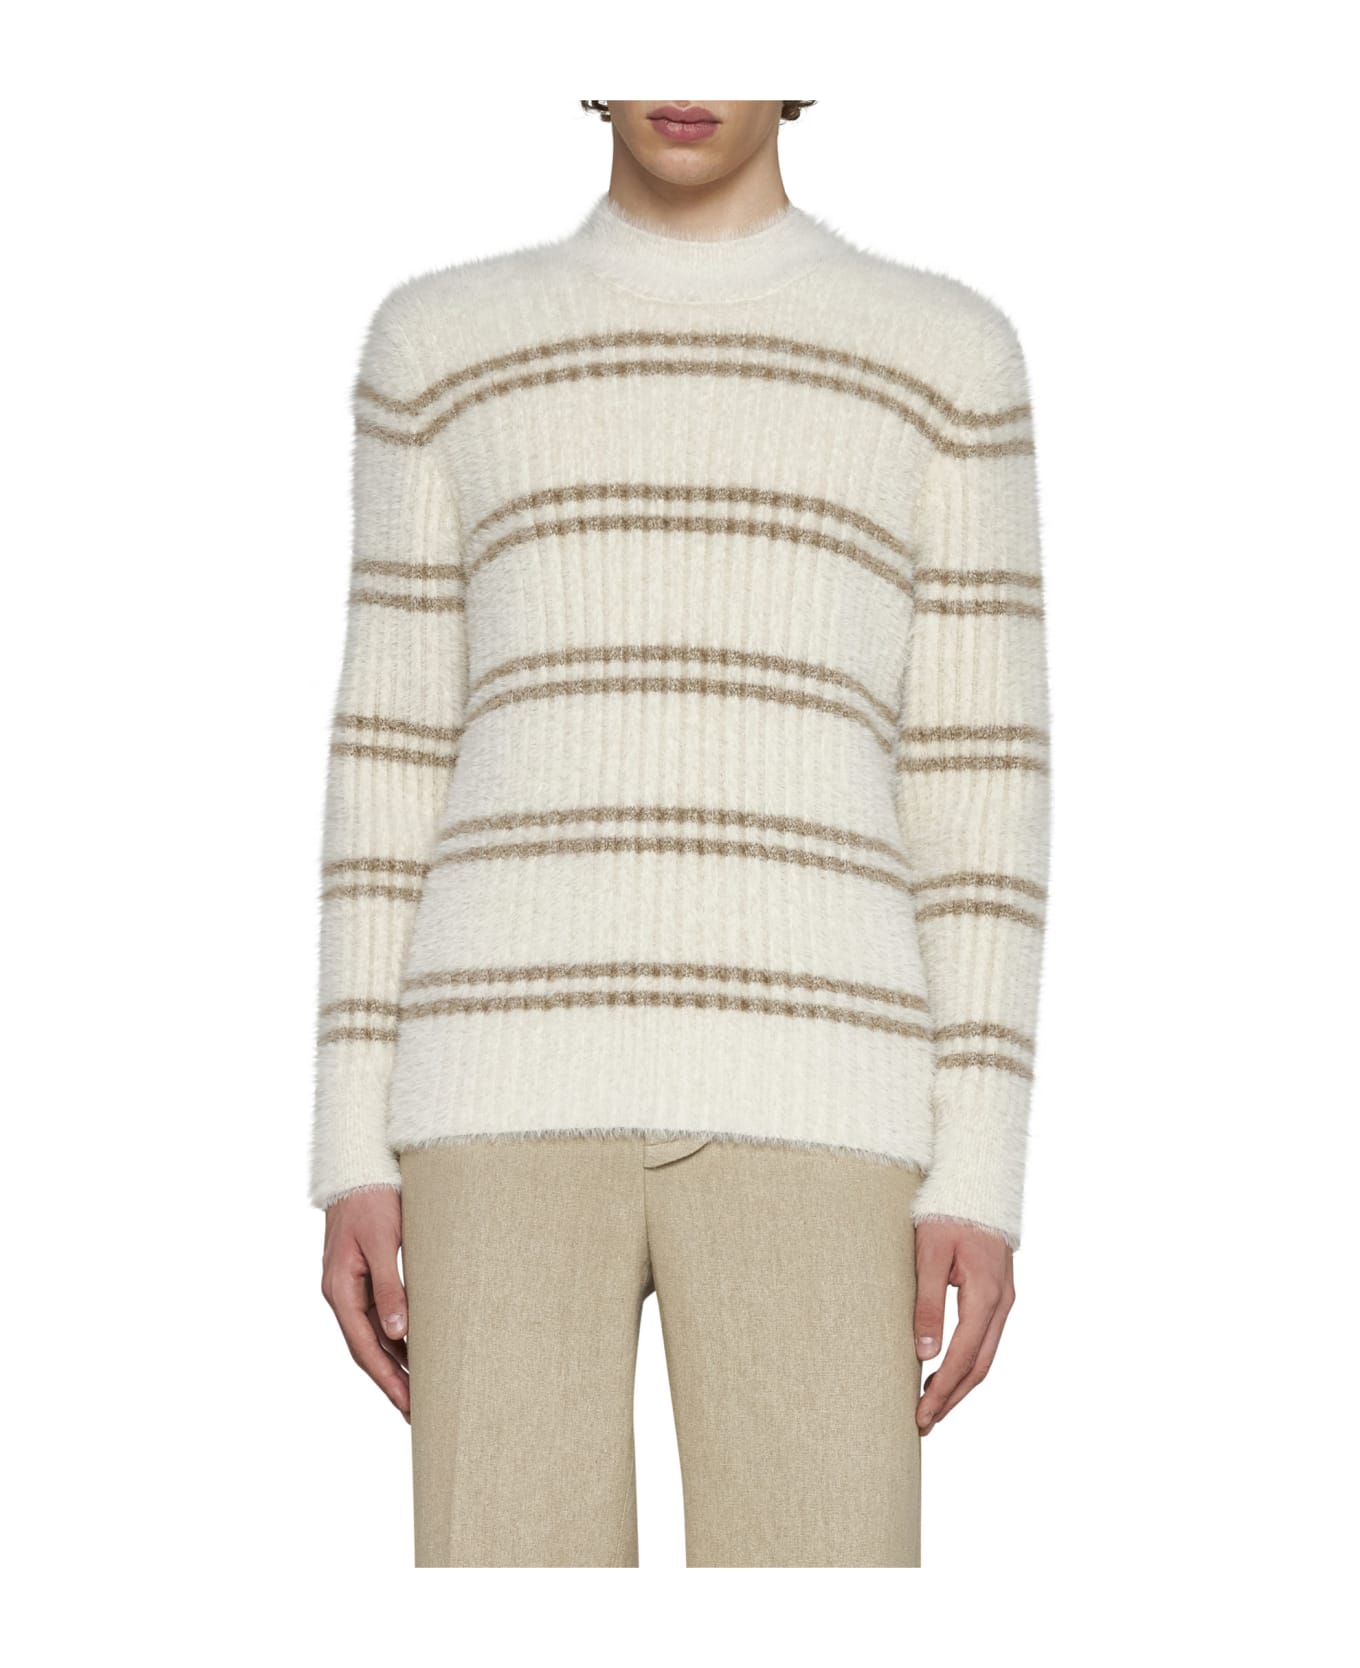 Jacquemus Sweater | italist, ALWAYS LIKE A SALE